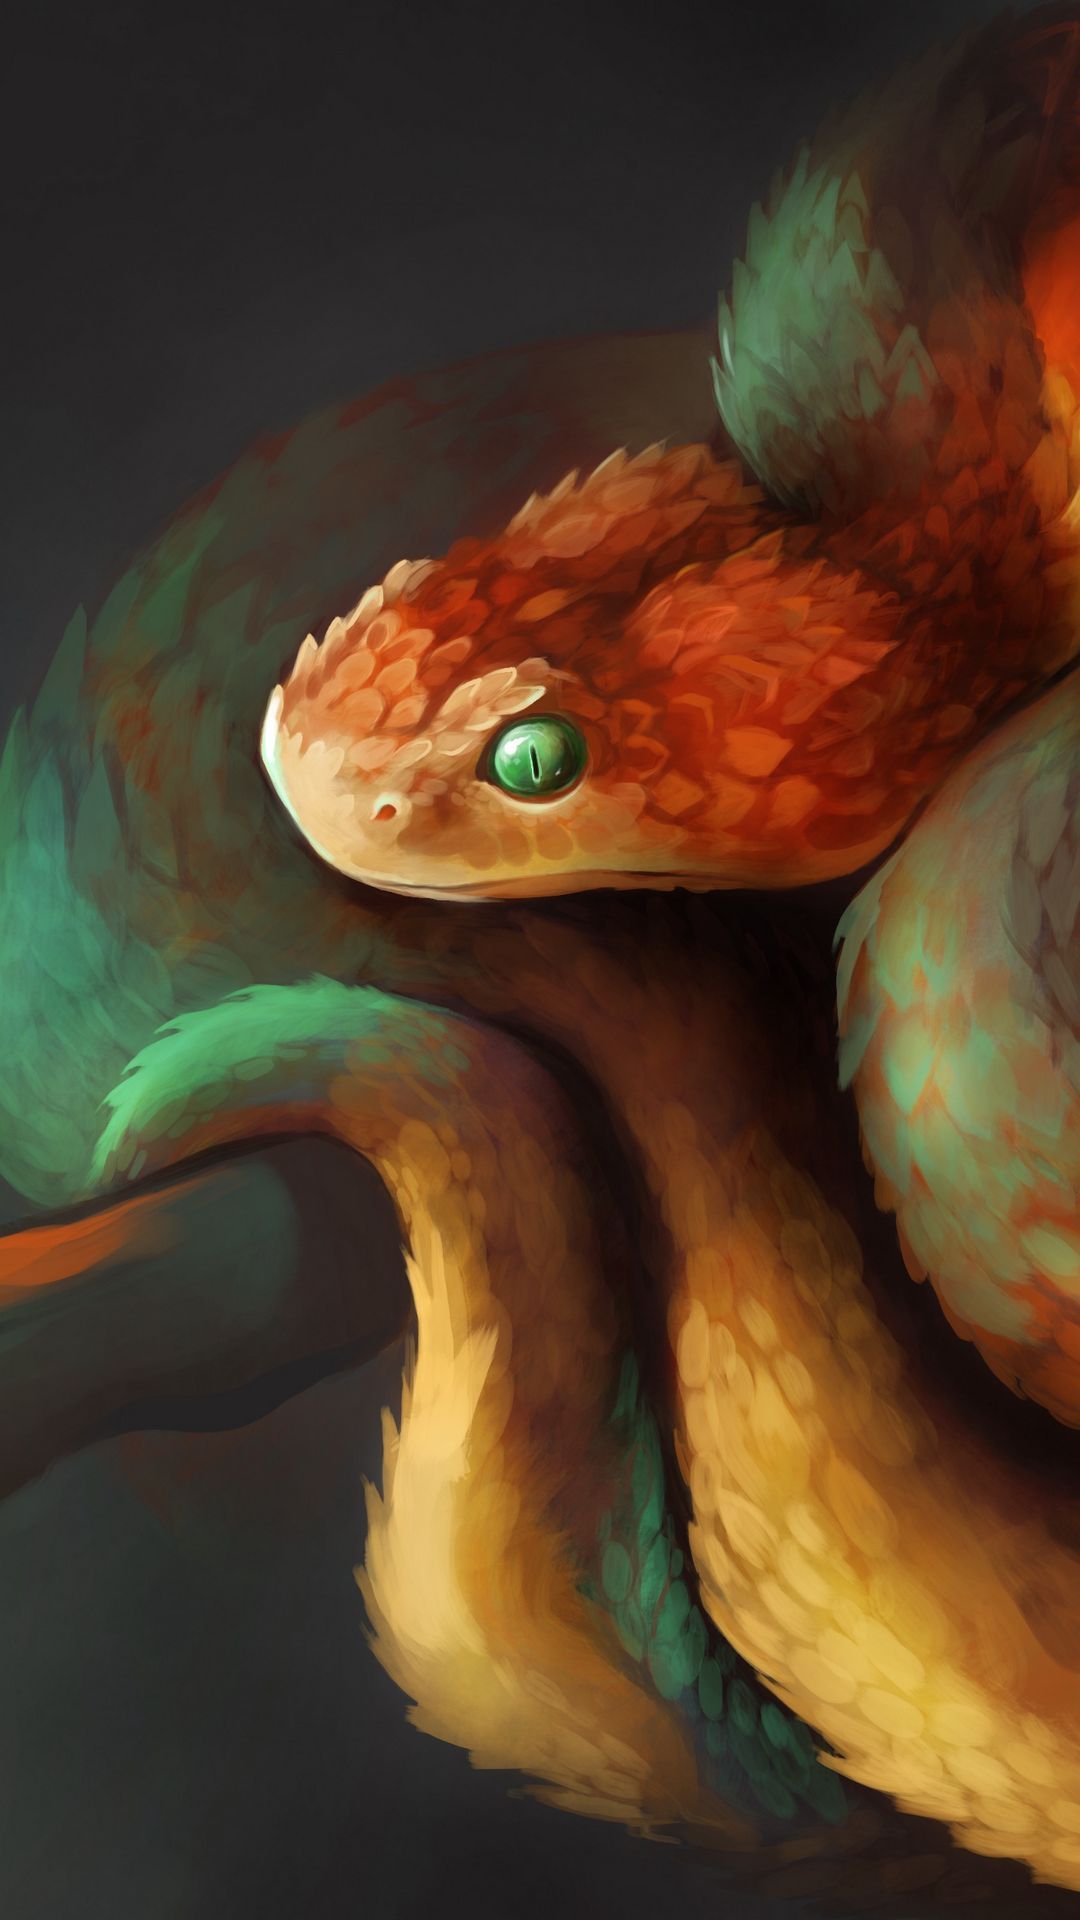 Artwork of a snake, painted in a digital style. - Snake